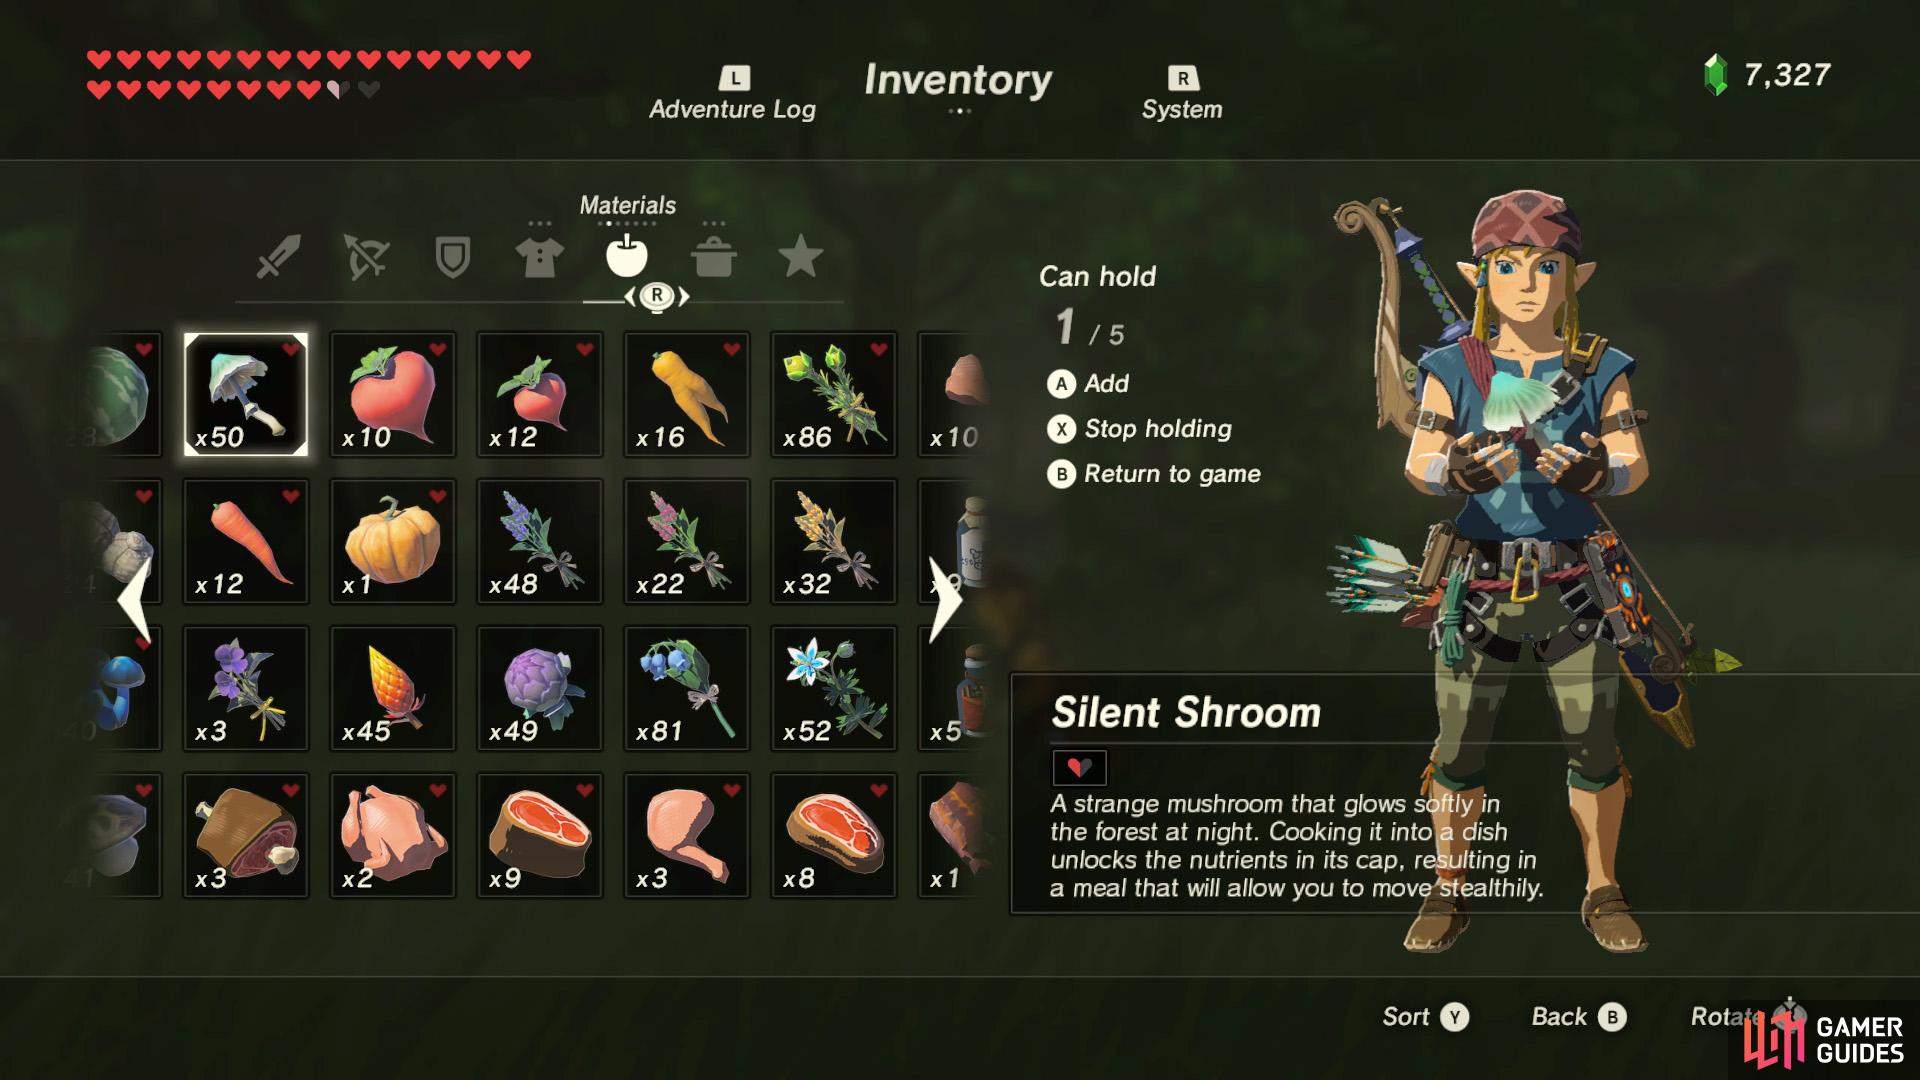 Silent Shrooms provide a stealth effect when cooked, but they also make you glow in the dark. (The last part is a lie.)